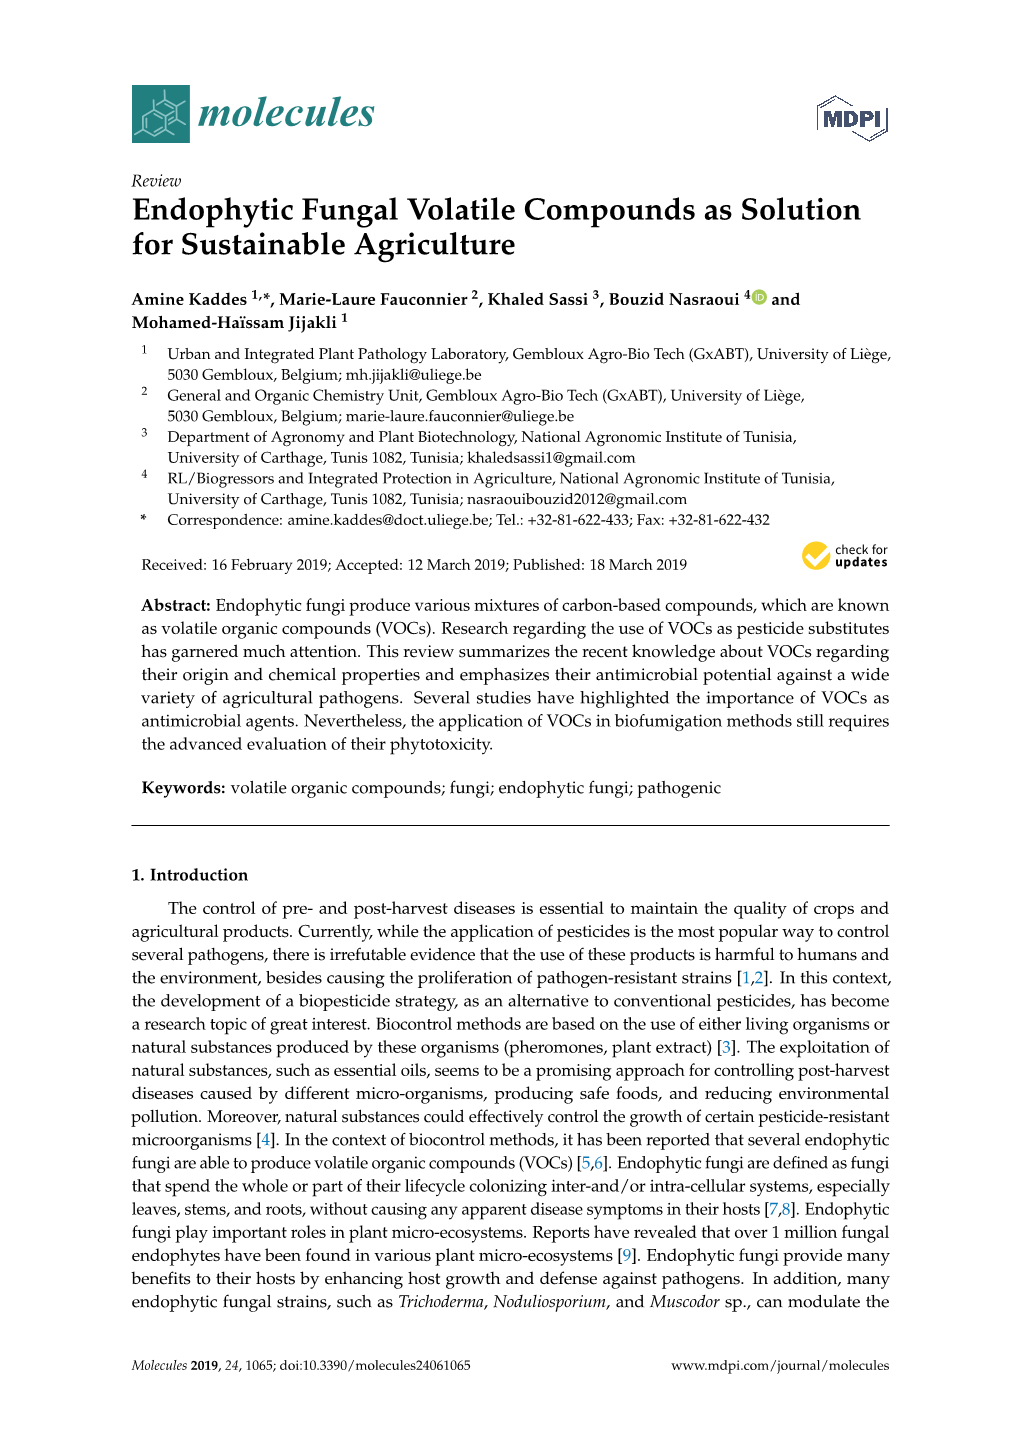 Endophytic Fungal Volatile Compounds As Solution for Sustainable Agriculture